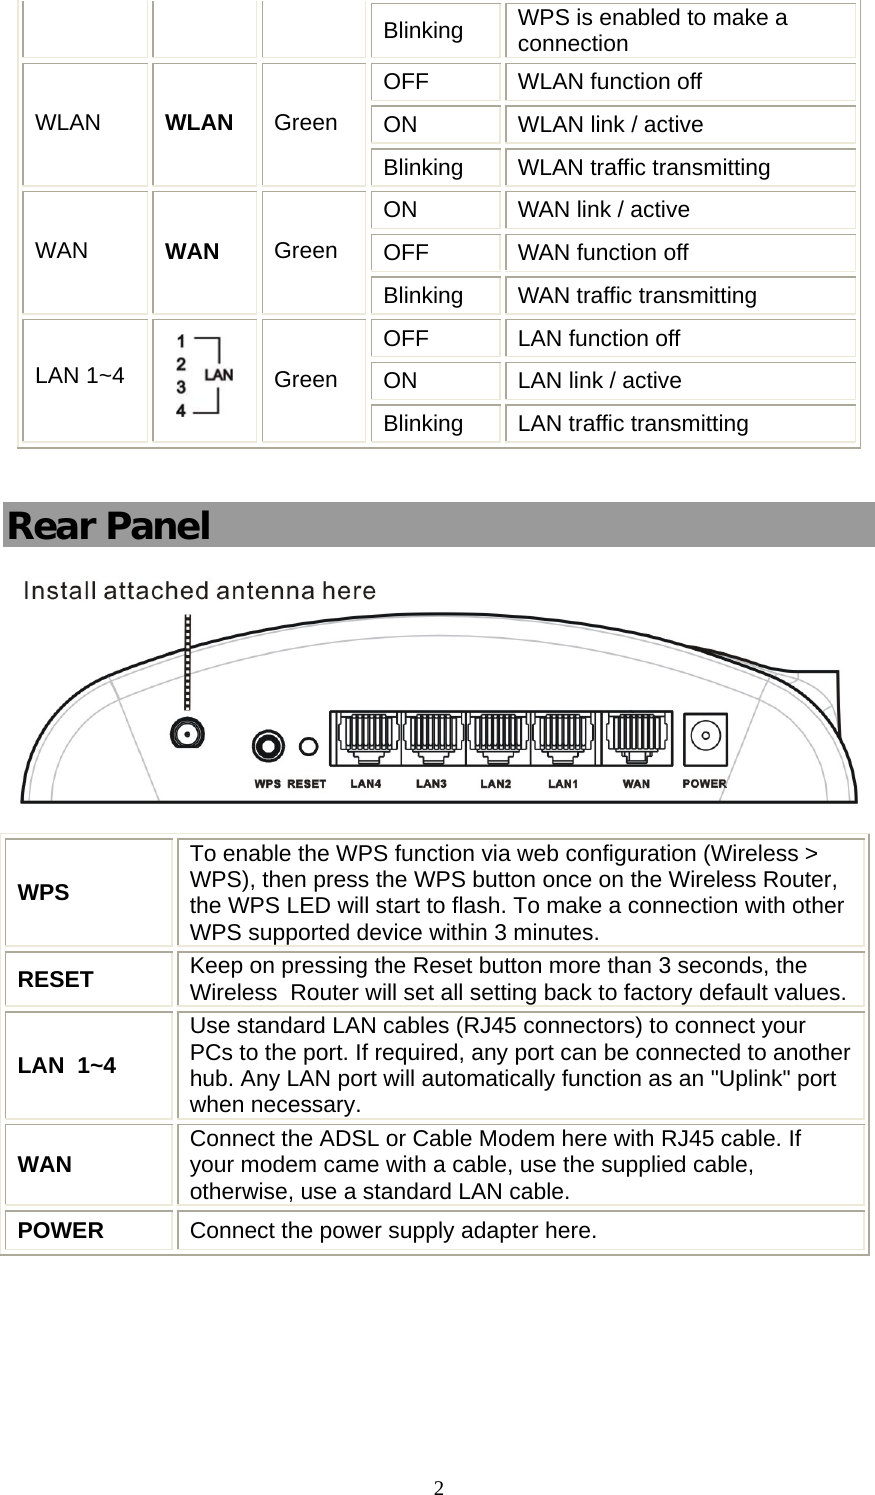   2Blinking  WPS is enabled to make a connection OFF  WLAN function off ON  WLAN link / active WLAN   WLAN   Green Blinking  WLAN traffic transmitting ON  WAN link / active OFF  WAN function off WAN  WAN  Green Blinking  WAN traffic transmitting OFF  LAN function off ON  LAN link / active LAN 1~4  Green Blinking  LAN traffic transmitting  Rear Panel  WPS  To enable the WPS function via web configuration (Wireless &gt; WPS), then press the WPS button once on the Wireless Router, the WPS LED will start to flash. To make a connection with other WPS supported device within 3 minutes. RESET  Keep on pressing the Reset button more than 3 seconds, the Wireless  Router will set all setting back to factory default values. LAN  1~4 Use standard LAN cables (RJ45 connectors) to connect your PCs to the port. If required, any port can be connected to another hub. Any LAN port will automatically function as an &quot;Uplink&quot; port when necessary. WAN  Connect the ADSL or Cable Modem here with RJ45 cable. If your modem came with a cable, use the supplied cable, otherwise, use a standard LAN cable. POWER  Connect the power supply adapter here.  